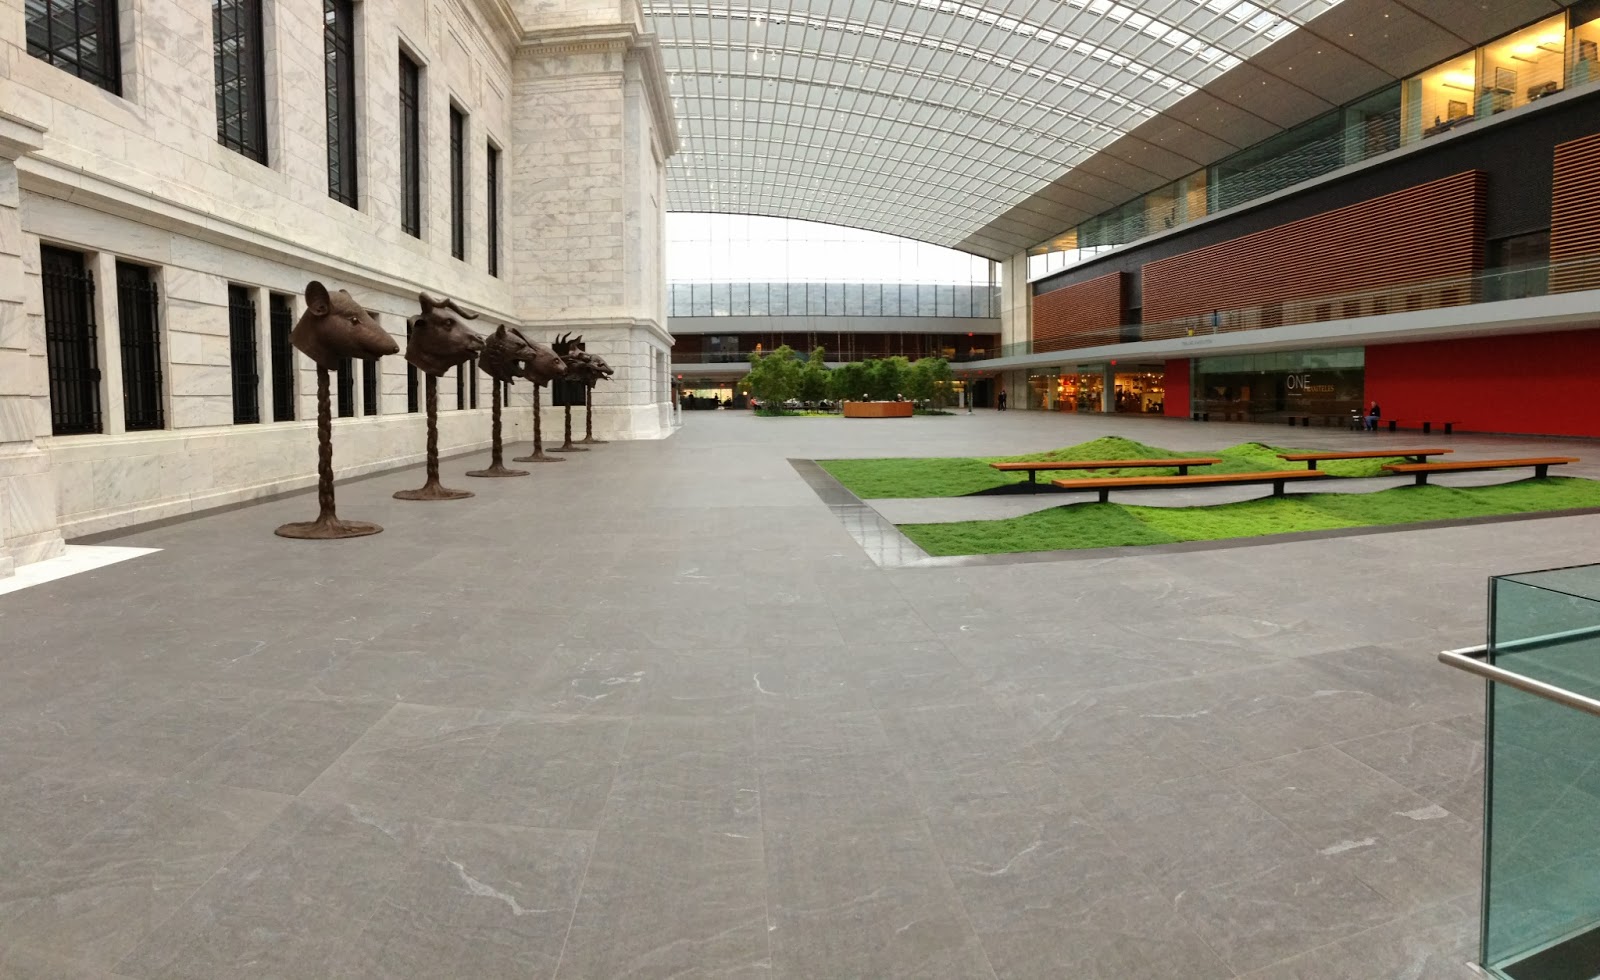 Wide open space at the museum